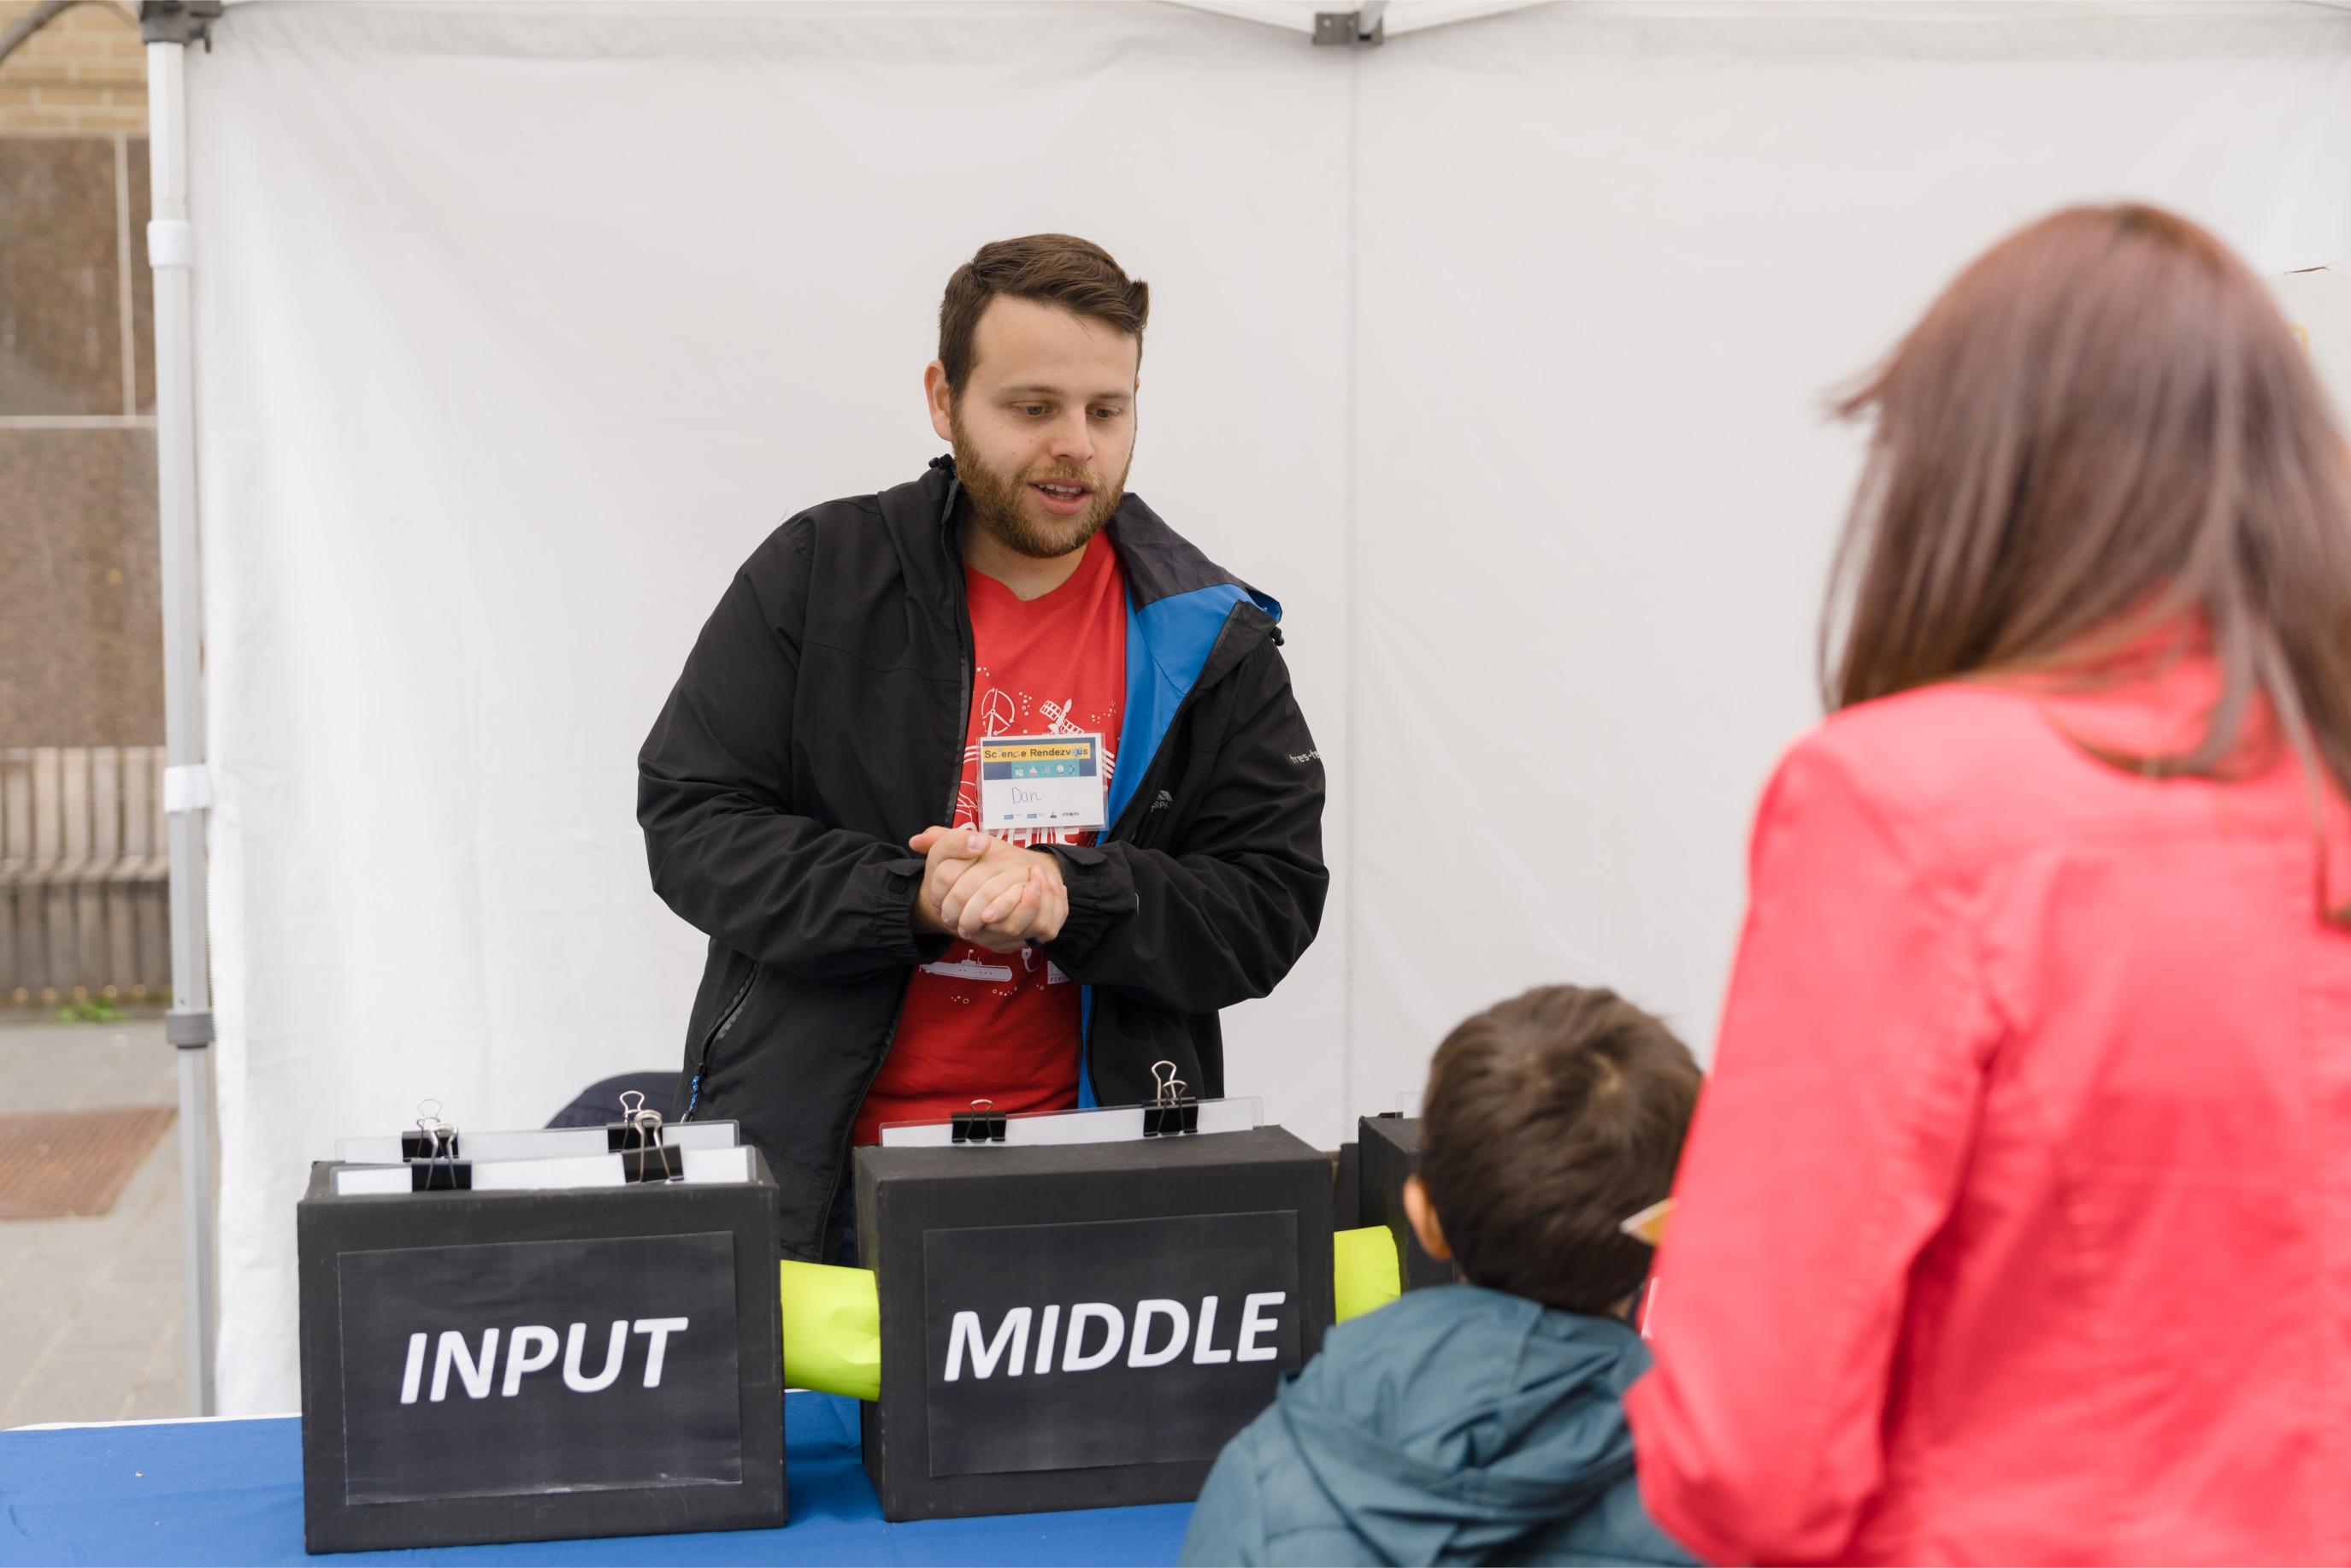 A volunteer talking to the participants at the Deep Learning Booth.